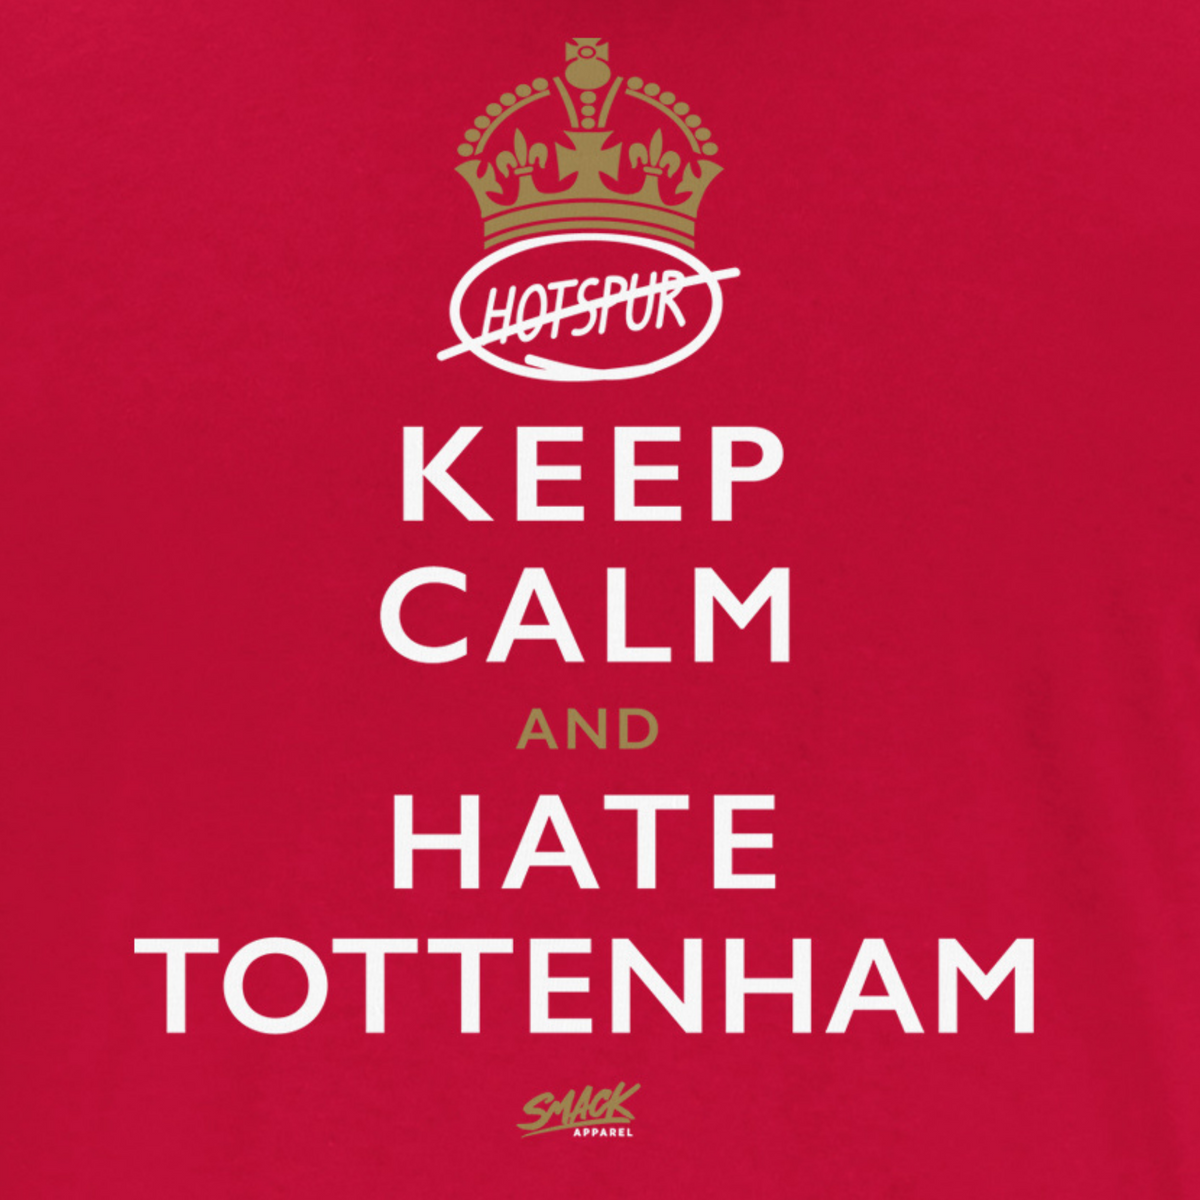  Keep Calm and Hate Tottenham T-Shirt for Arsenal Soccer Fans  (SM-5XL) : Sports & Outdoors